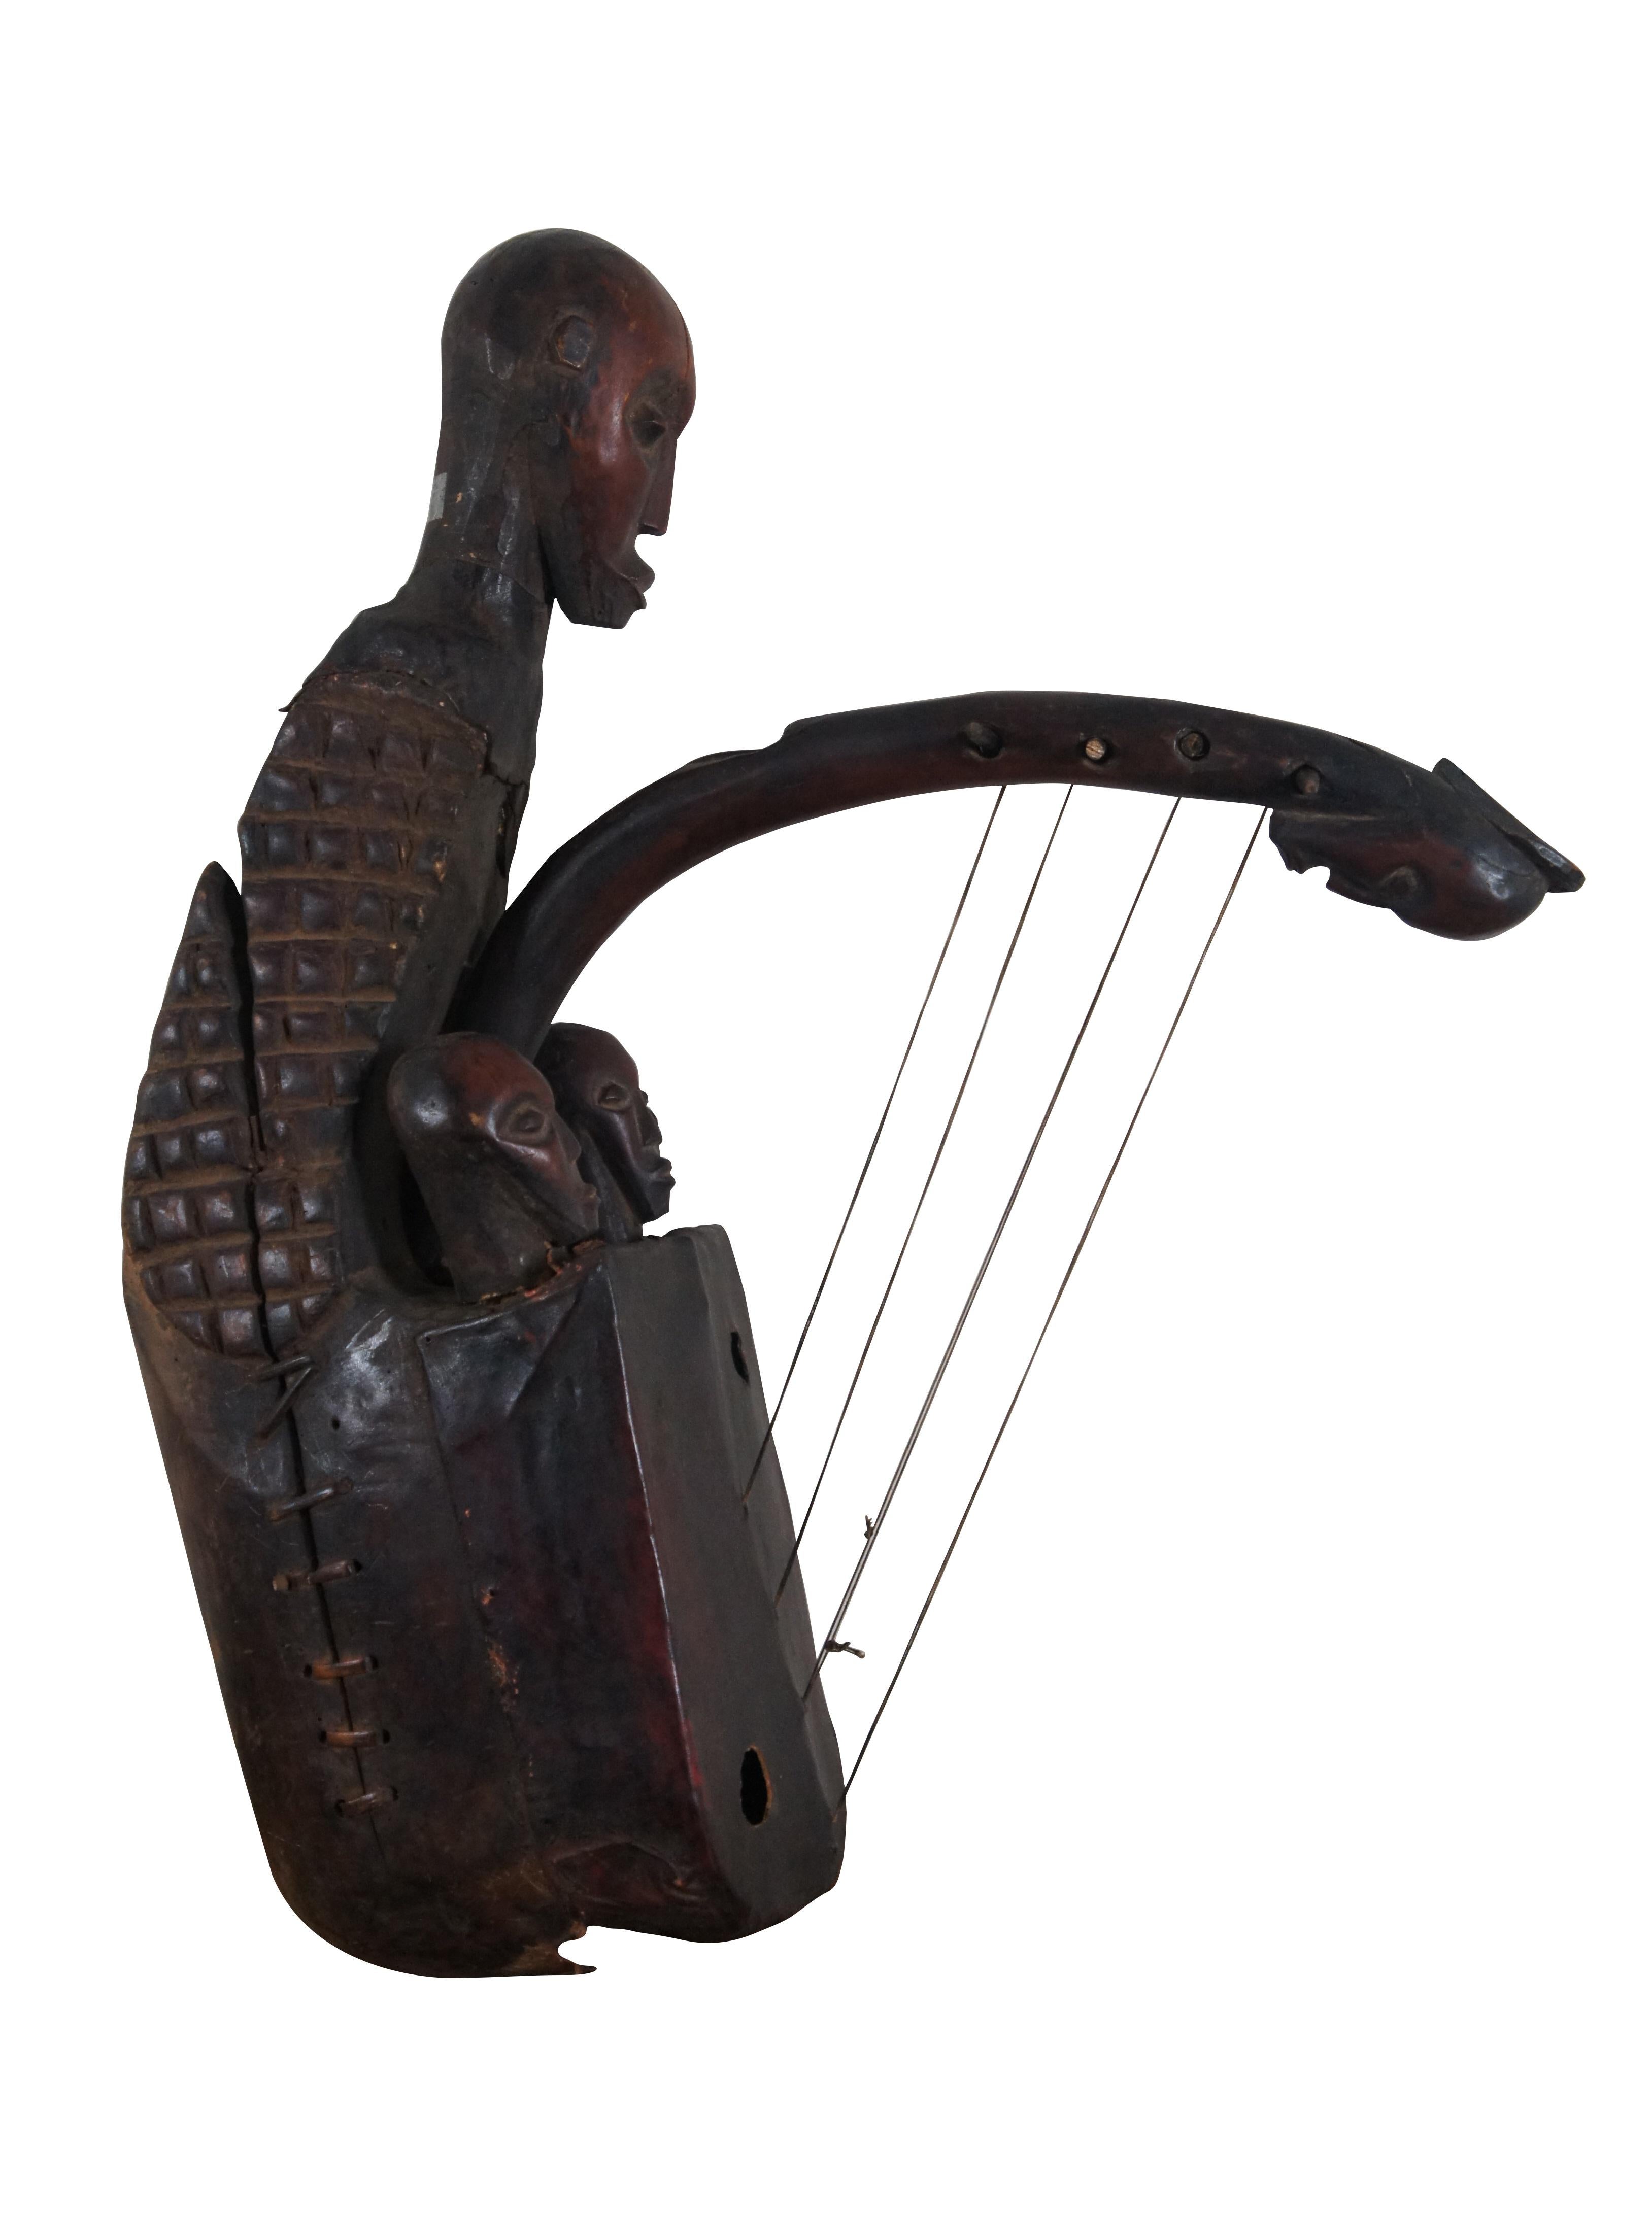 Rare vintage museum quality African Mangbetu fertility harp / domu, an African stringed instrument of the Mangbetu poeple, featuring a round wooden body, stretched red leather head with two sounding holes and four strings on pegs. Hand carved, in